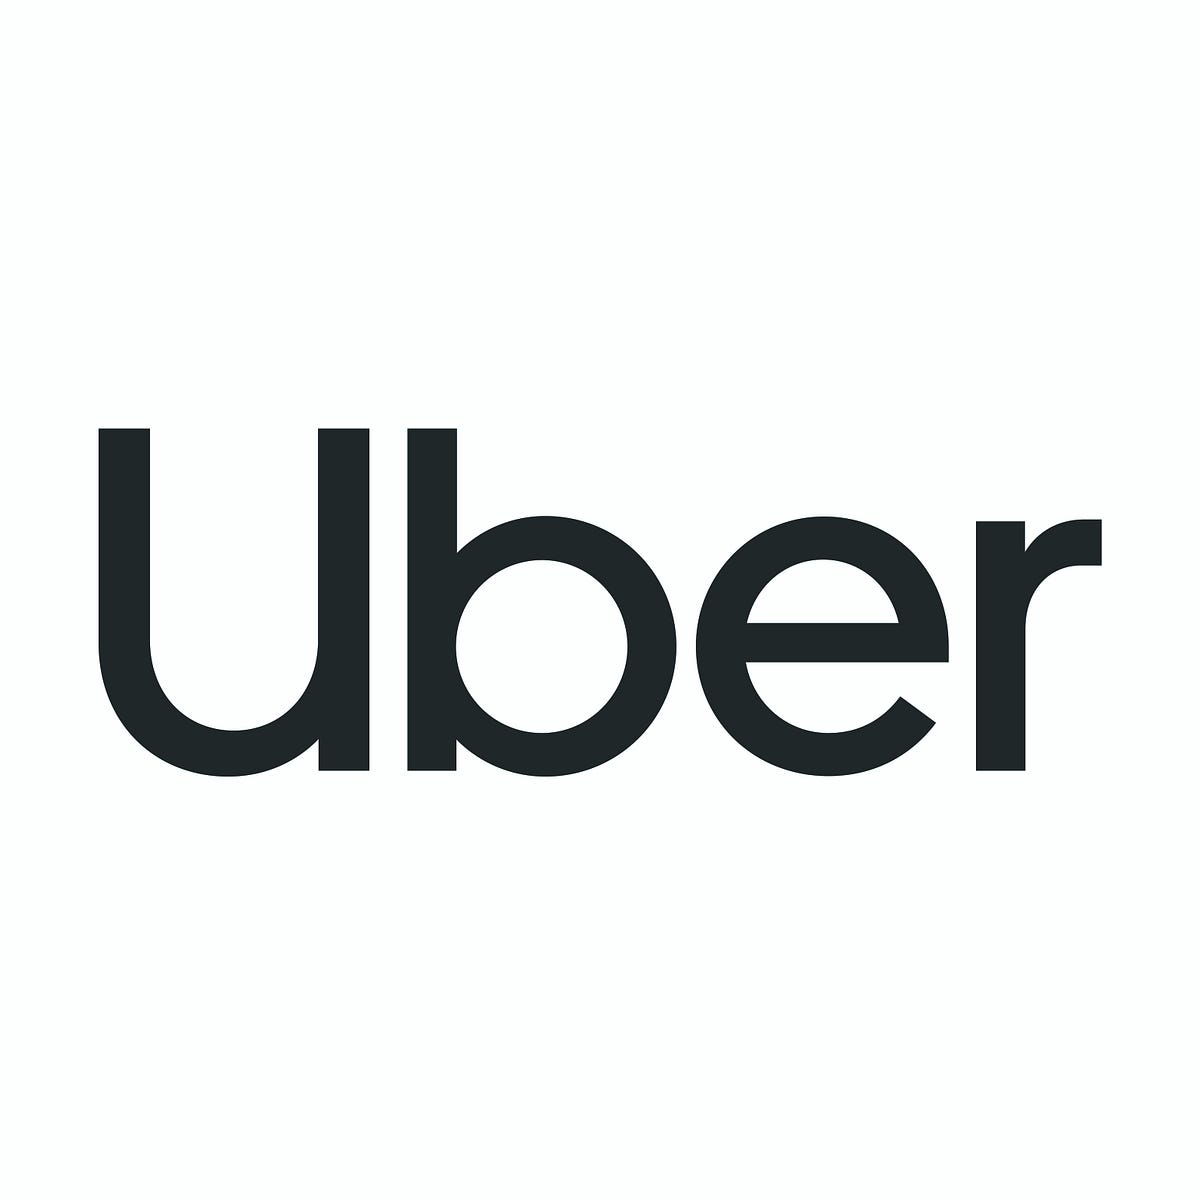 The Power of Insights: A behind-the-scenes look at the new insights  platform at Uber, by Etienne Fang, Uber Design